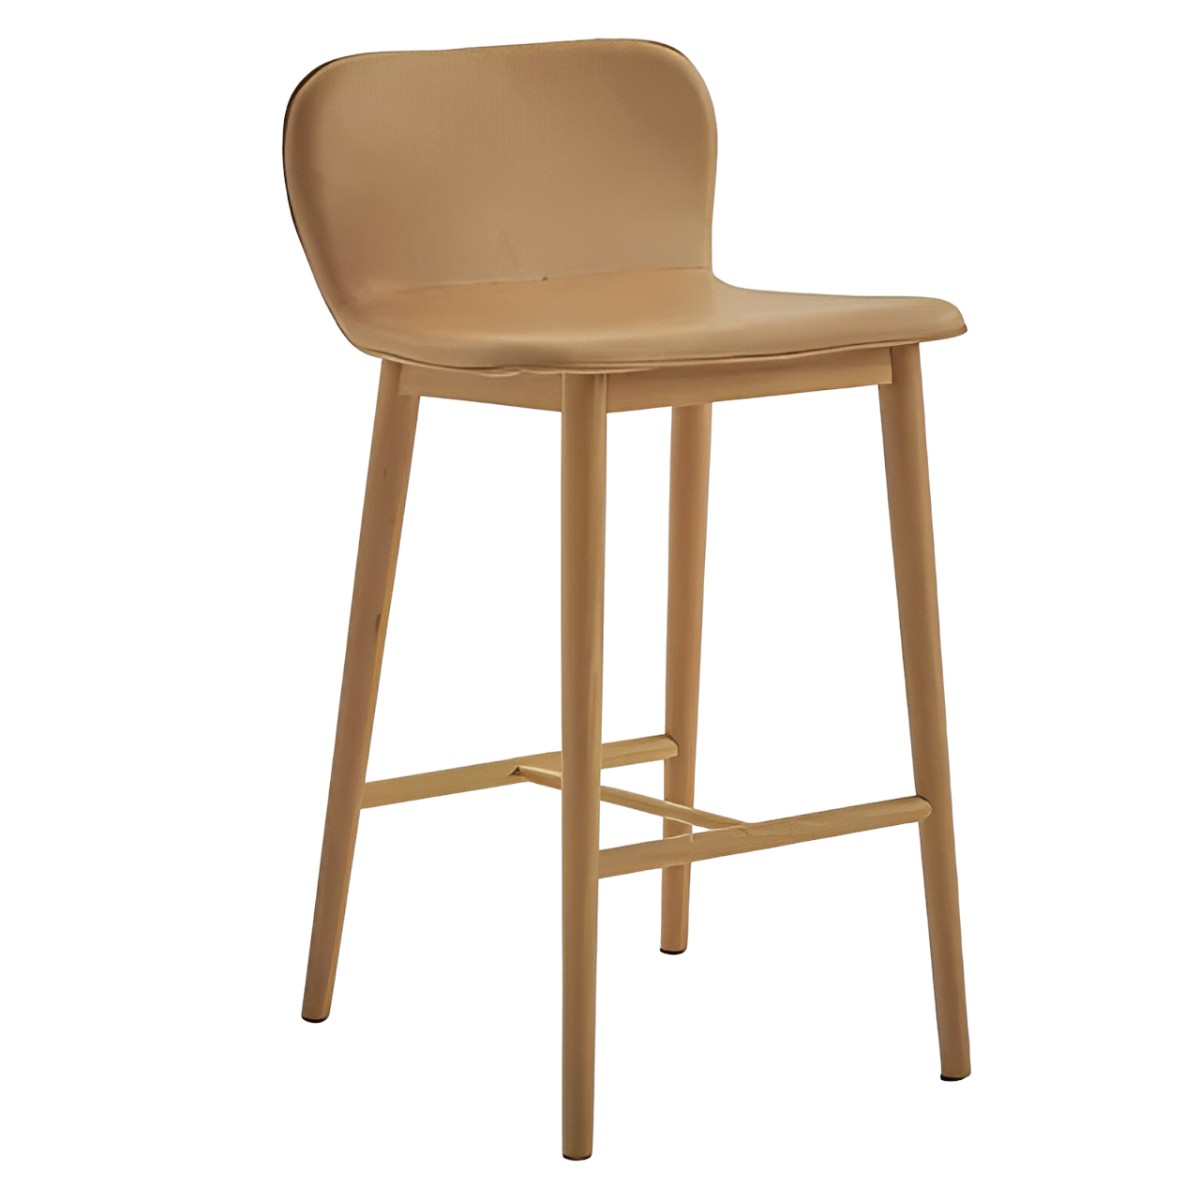 Puddle Bar Stool - Upholstered Seat and Back | Highlight image